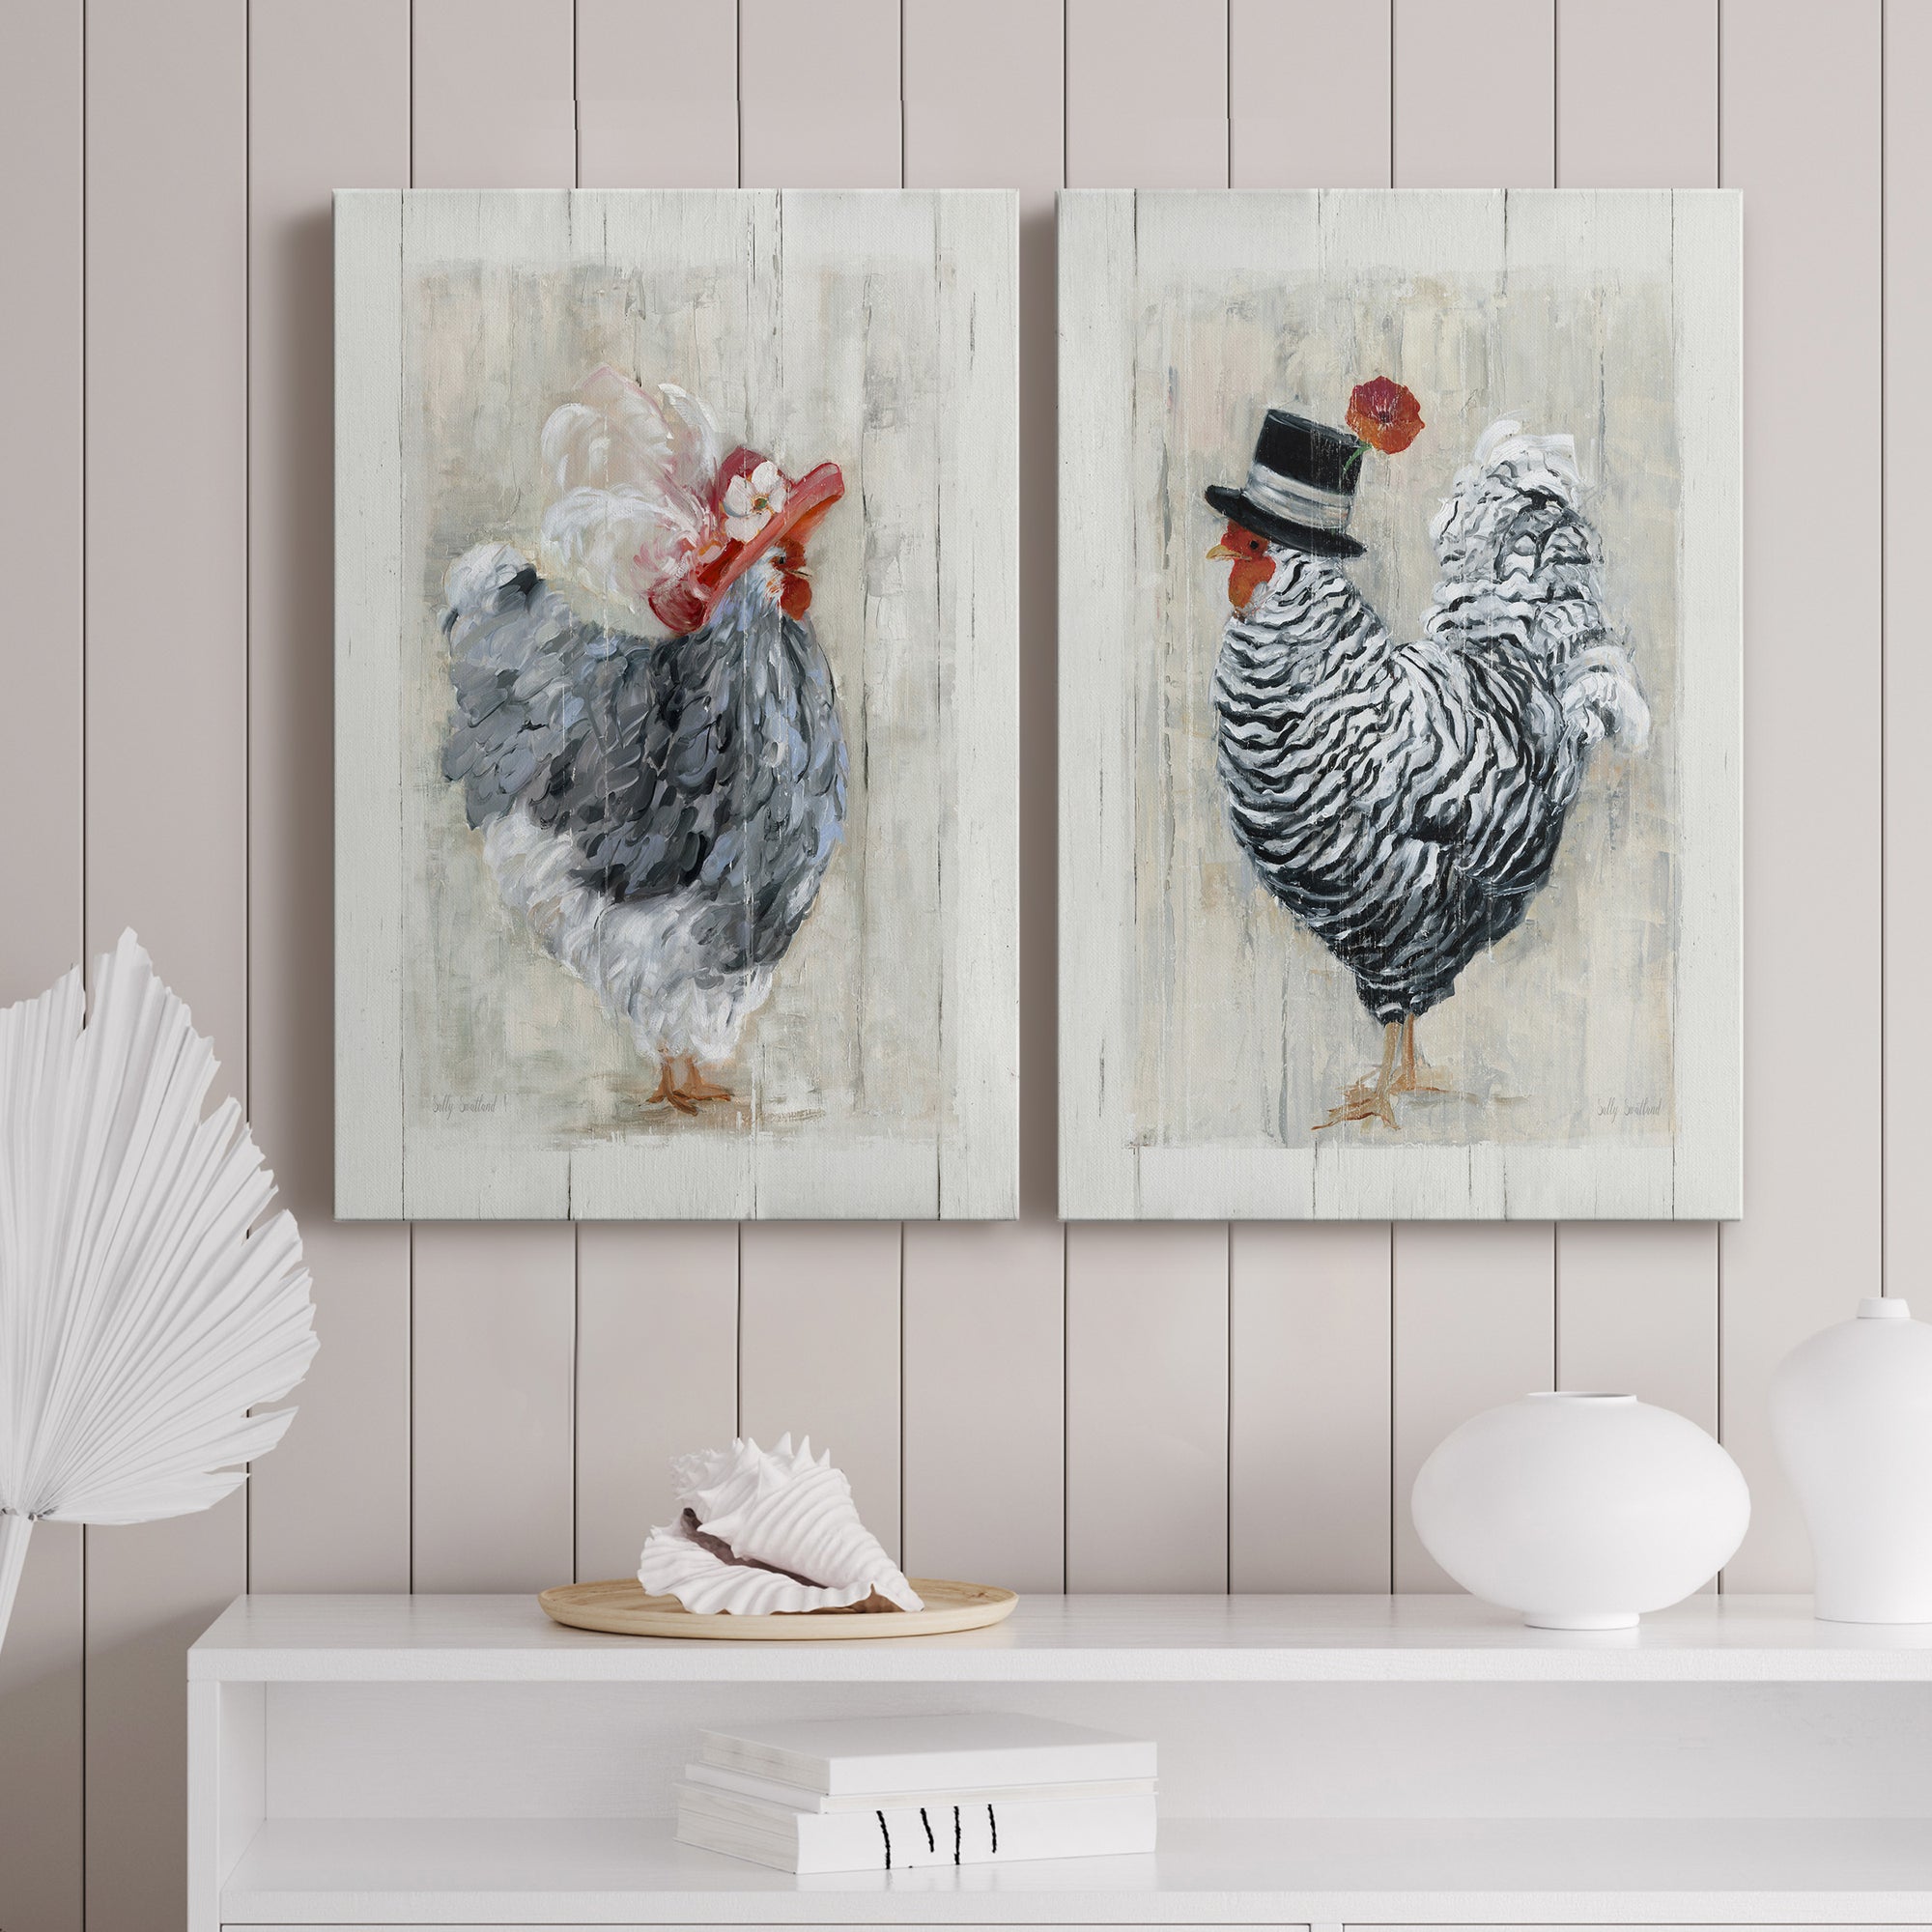 Sunday Best Hen Premium Gallery Wrapped Canvas - Ready to Hang